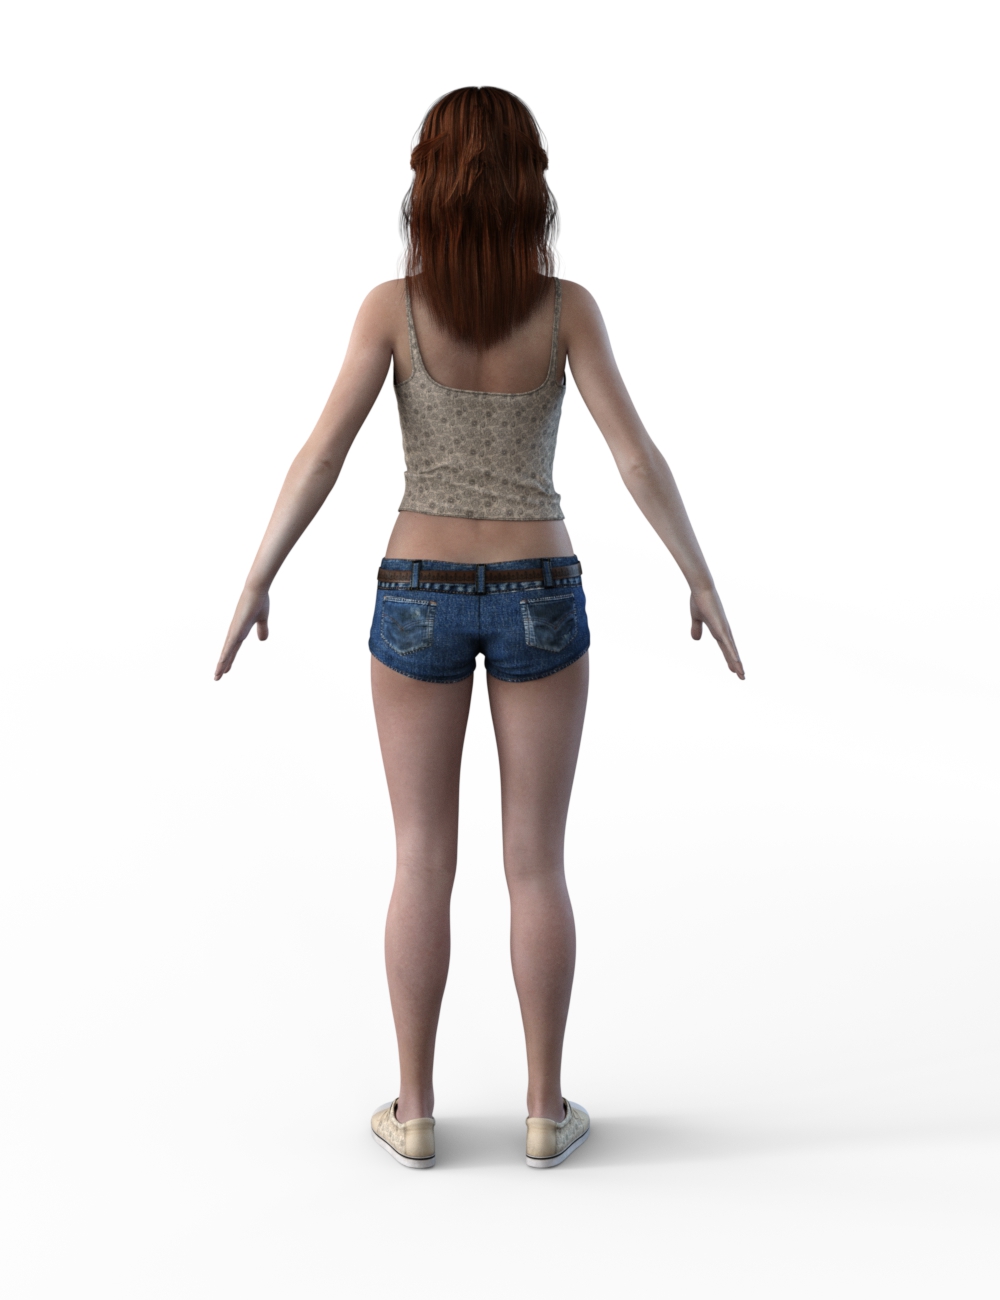 FBX- Base Female Casual Sunday Outfit by: Paleo, 3D Models by Daz 3D